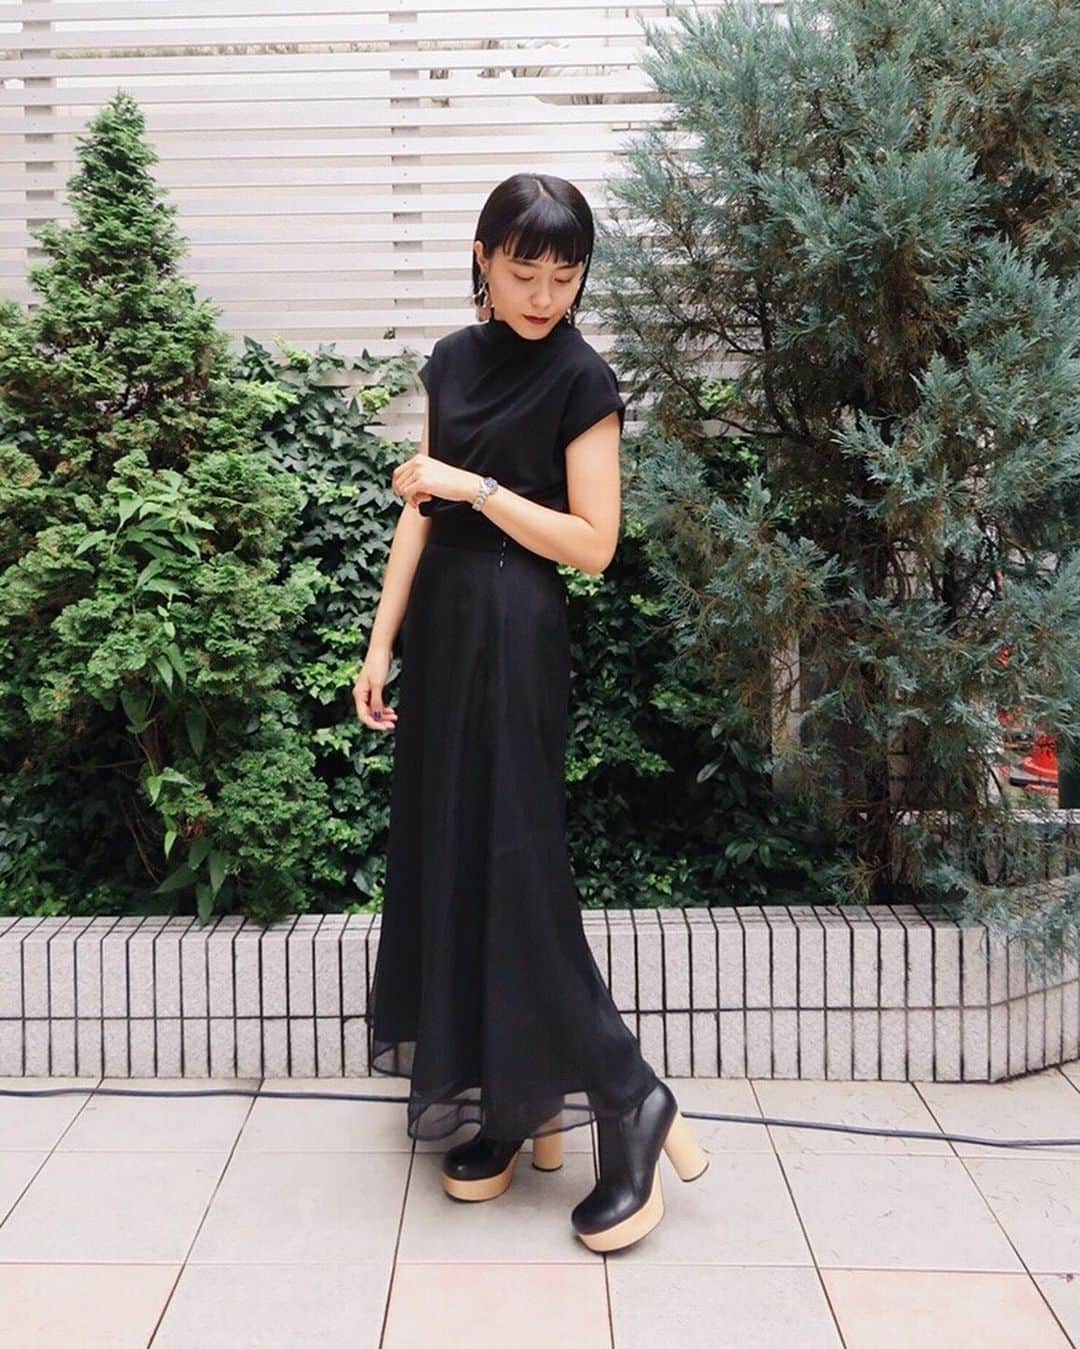 SLY OFFICIAL INFORMATIONさんのインスタグラム写真 - (SLY OFFICIAL INFORMATIONInstagram)「ㅤㅤㅤㅤㅤㅤㅤㅤㅤㅤㅤㅤㅤ #SLY_info TSUKIKA KATO【156cm】 ルミネ立川店スタッフ ——————————————————— 全て店舗・WEBSTORE・ZOZOTOWNにて販売中 ㅤㅤㅤㅤㅤㅤㅤㅤㅤㅤㅤㅤㅤ ☑︎BOTTLE N/C SHORT SLEEVE TOPS (030DAA80-3690) O/WHT,BLK,D/YEL,CAM ¥3,500+tax ㅤㅤㅤㅤㅤㅤㅤㅤㅤㅤㅤㅤㅤ ☑︎WIDE BRIM HAT (030DAM56-0320) BLK,BEG ¥4,000+tax ㅤㅤㅤㅤㅤㅤㅤㅤㅤㅤㅤㅤㅤ ☑︎SHEER ANIMAL LONG SK (030DAM31-5190) BLK/Multi ¥8,000+tax ㅤㅤㅤㅤㅤㅤㅤㅤㅤㅤㅤㅤㅤ ☑︎CHUNKY POLE HEEL BOOTIE (030DAM55-1570) BLK,M/BLK,BRN ㅤㅤㅤㅤㅤㅤㅤㅤㅤㅤㅤㅤㅤ ☑︎METAL WEIRD EARRINGS (030DAM56-5280) GLD,SLV ¥2,990+tax ——————————————————— #SLY  #SLY_fav」8月4日 14時05分 - sly_official_info